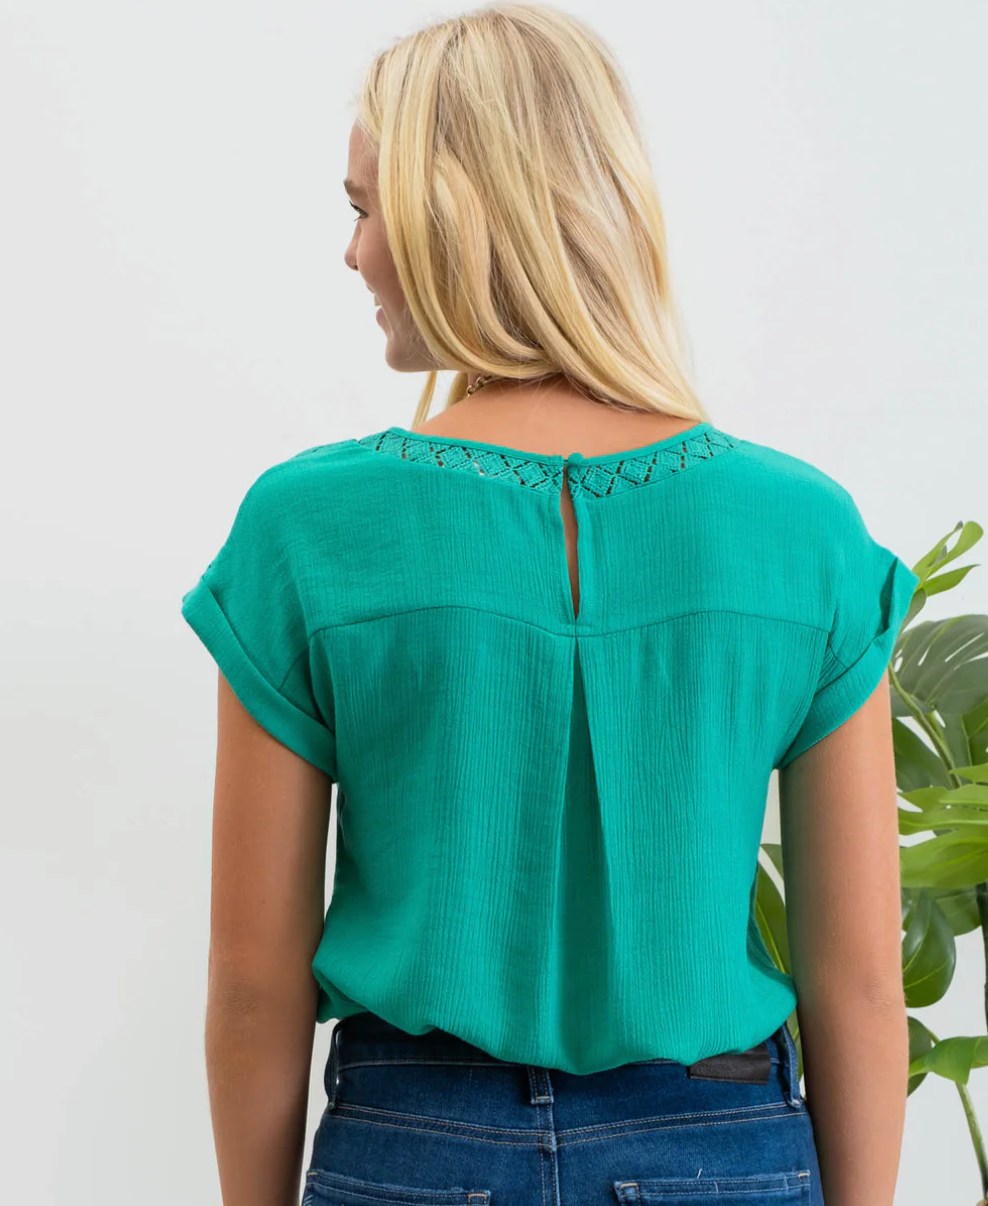 Eyelet Trim Blouse in Kelly Green - The Street Boutique 